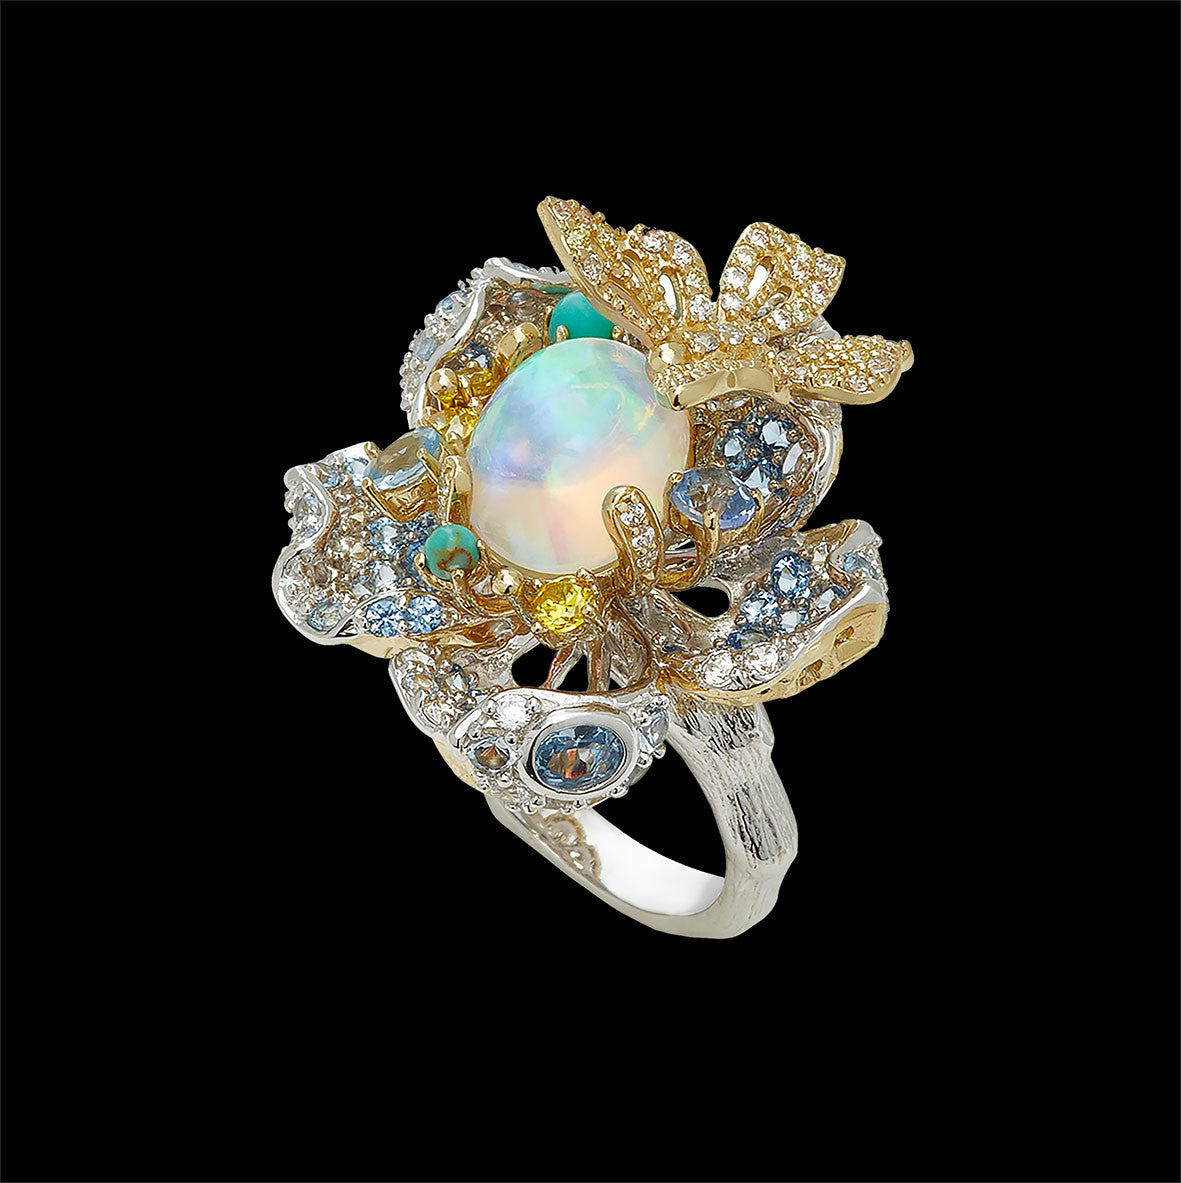 Sky Opal Bloom Ring, Ring, Anabela Chan Joaillerie - Fine jewelry with laboratory grown and created gemstones hand-crafted in the United Kingdom. Anabela Chan Joaillerie is the first fine jewellery brand in the world to champion laboratory-grown and created gemstones with high jewellery design, artisanal craftsmanship and a focus on ethical and sustainable innovations.